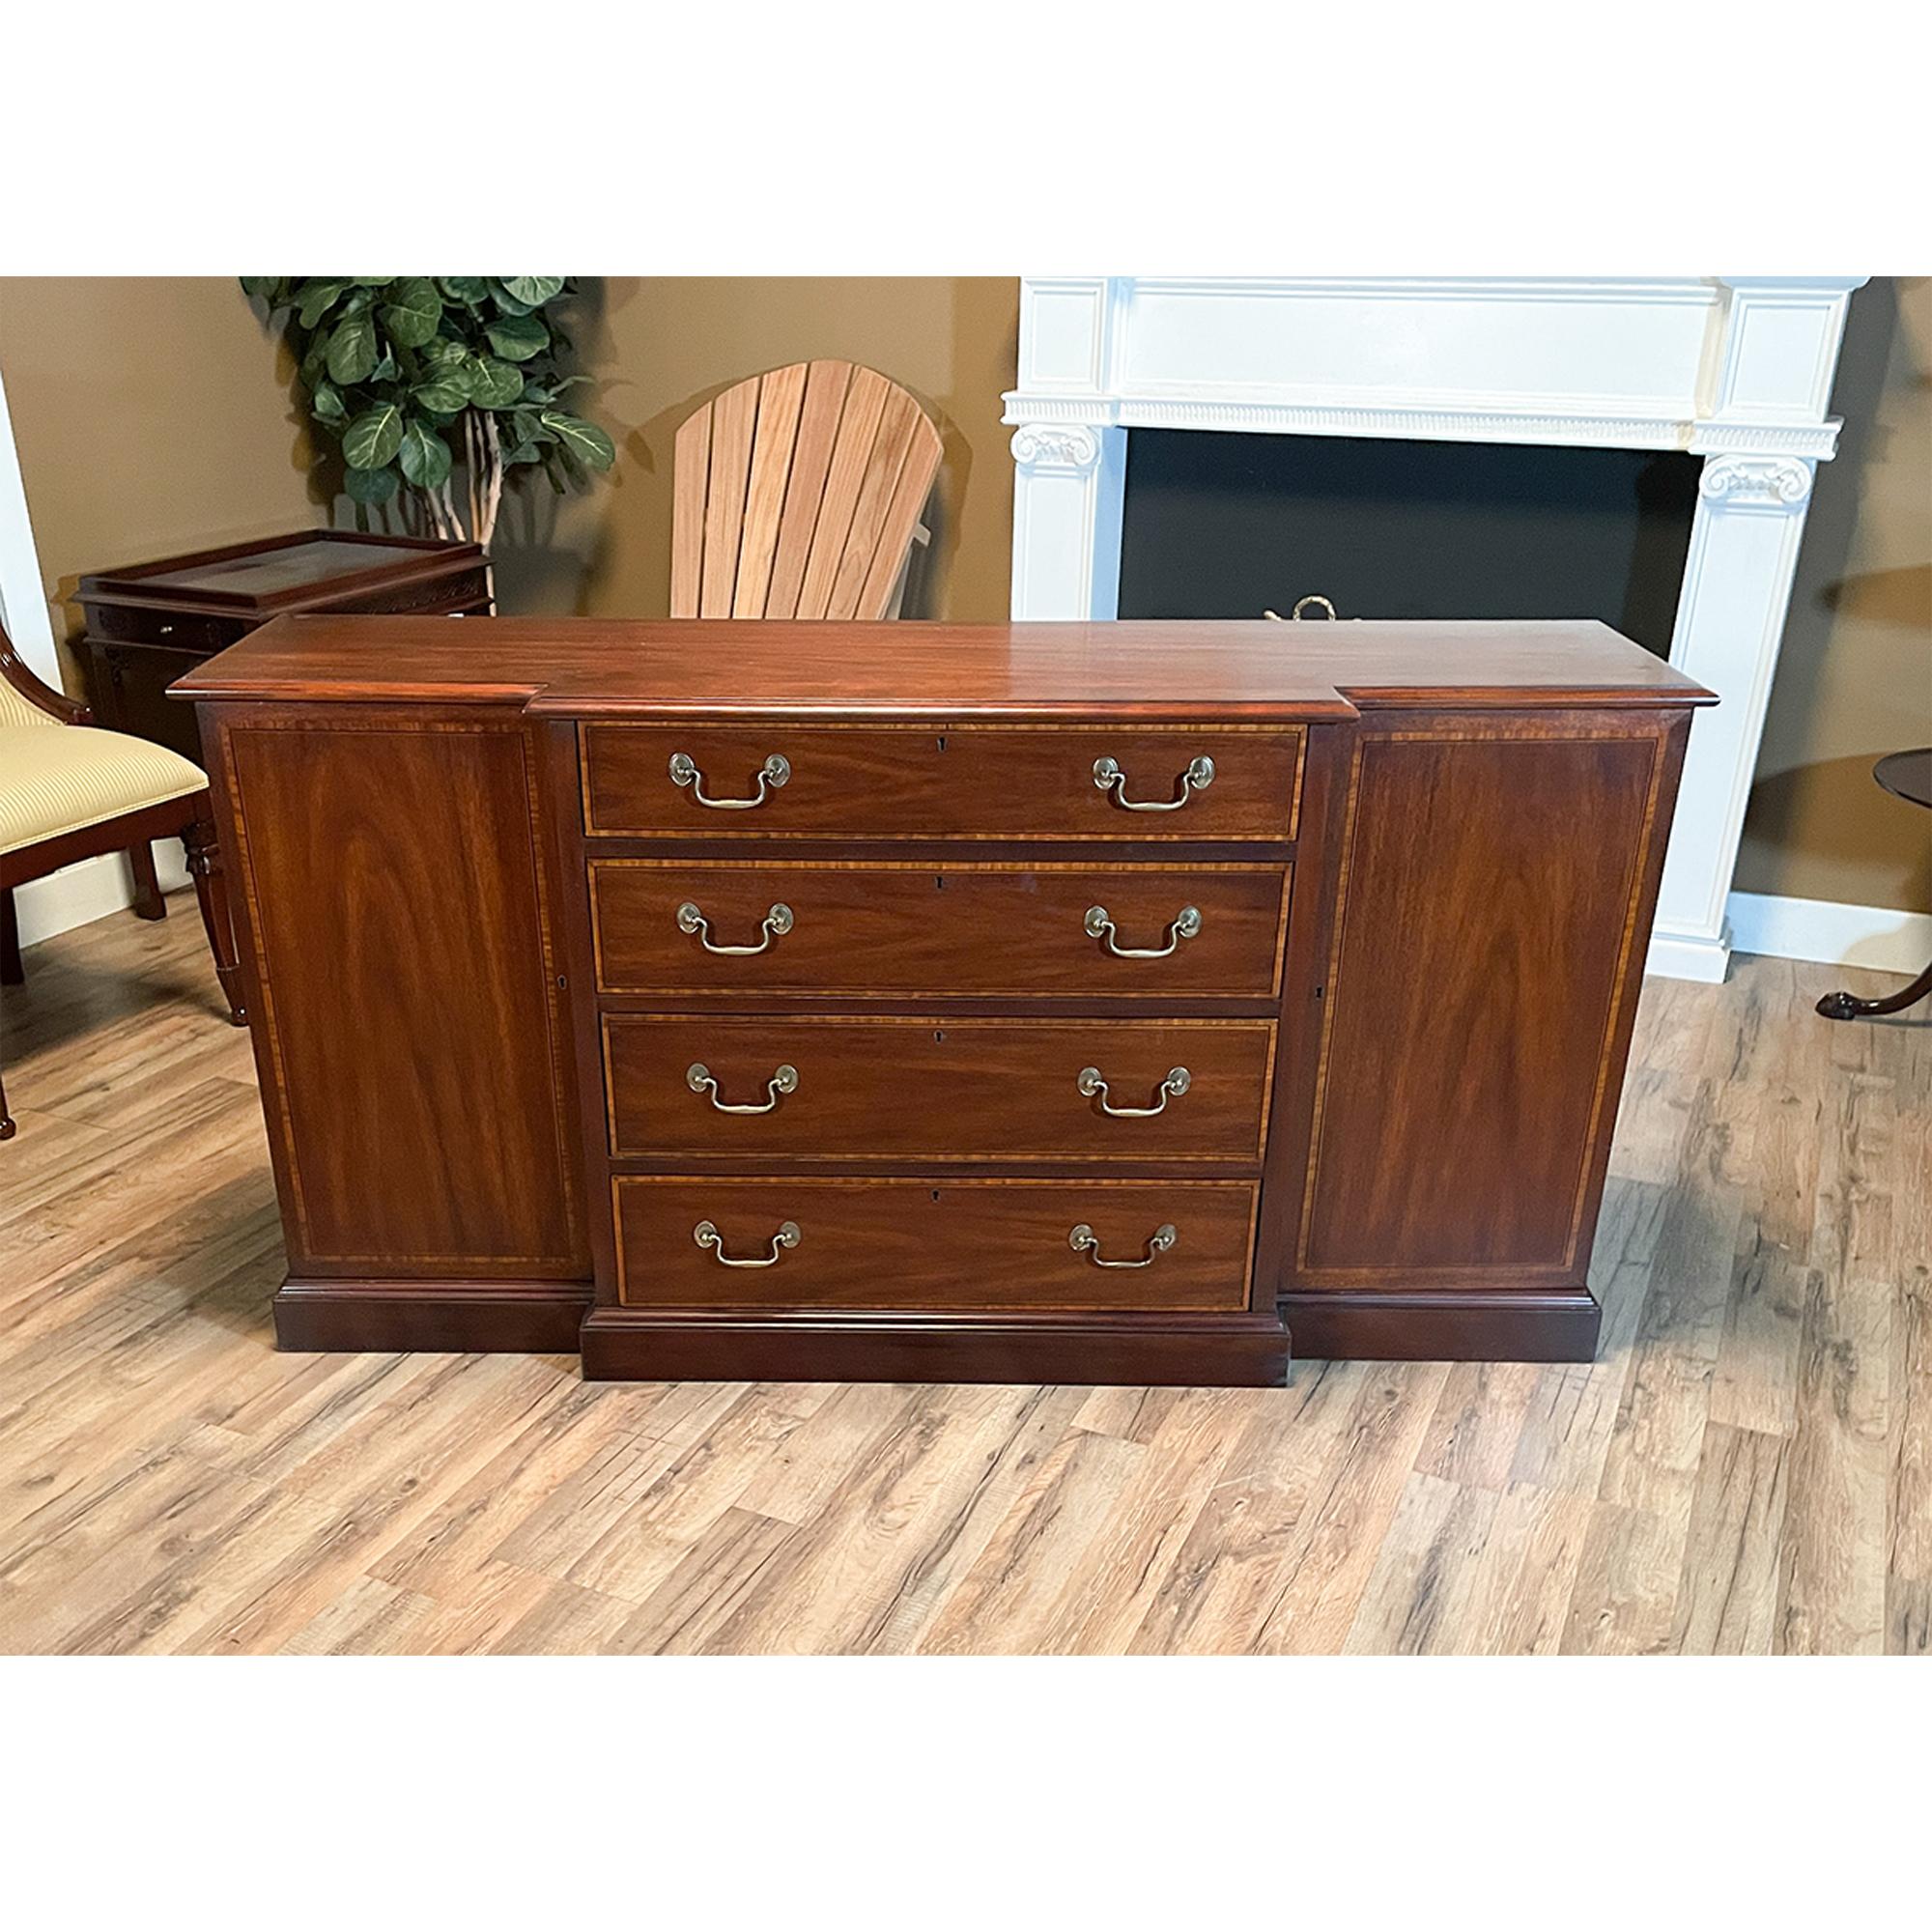 A Vintage Henkel Harris Two Piece Breakfront brought to you by Niagara Furniture. This china closet is impressive in both it’s design and scale. Made of beautifully grained solid mahogany, the bookcase top features glass shelves as well as original